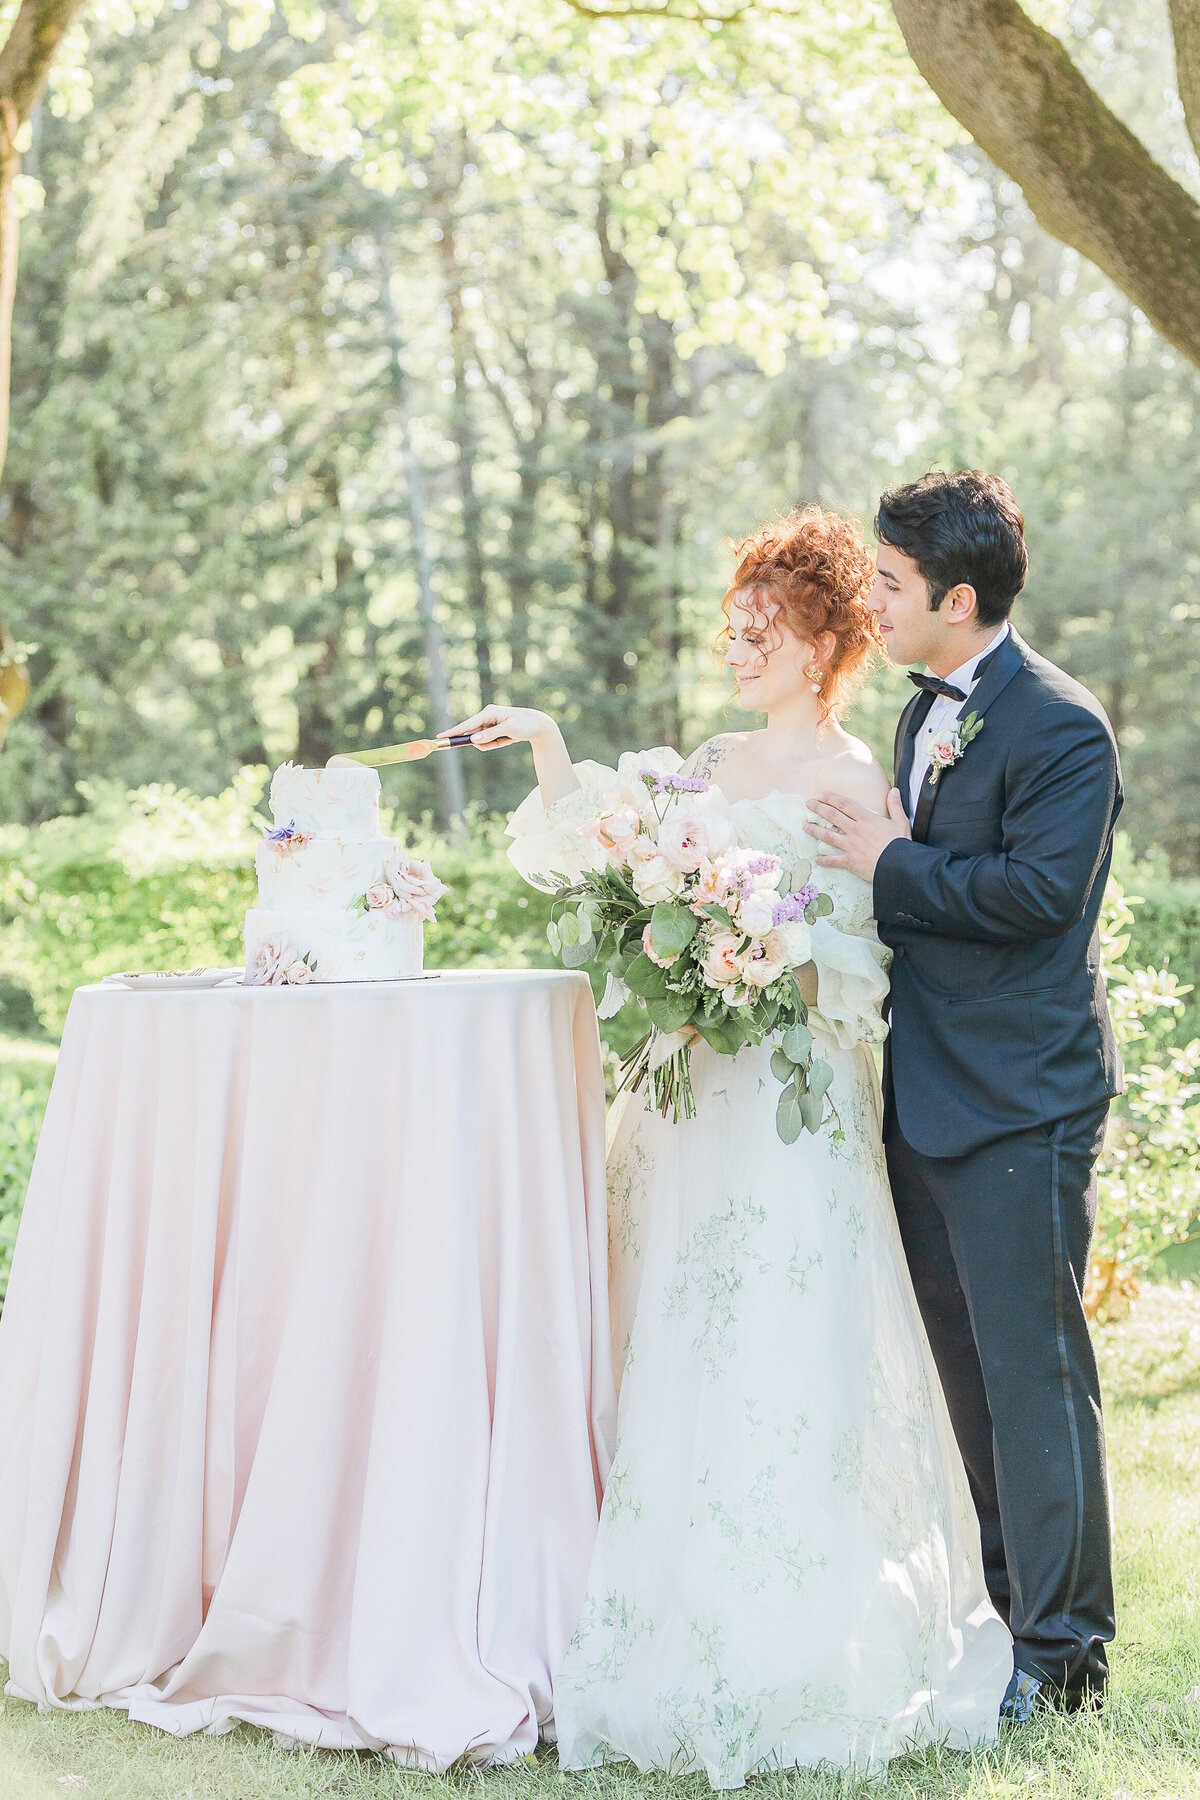 Bride and groom cut a cake at their french-inspired countryside wedding. Captured by best Massachusetts wedding photographer Lia Rose Weddings